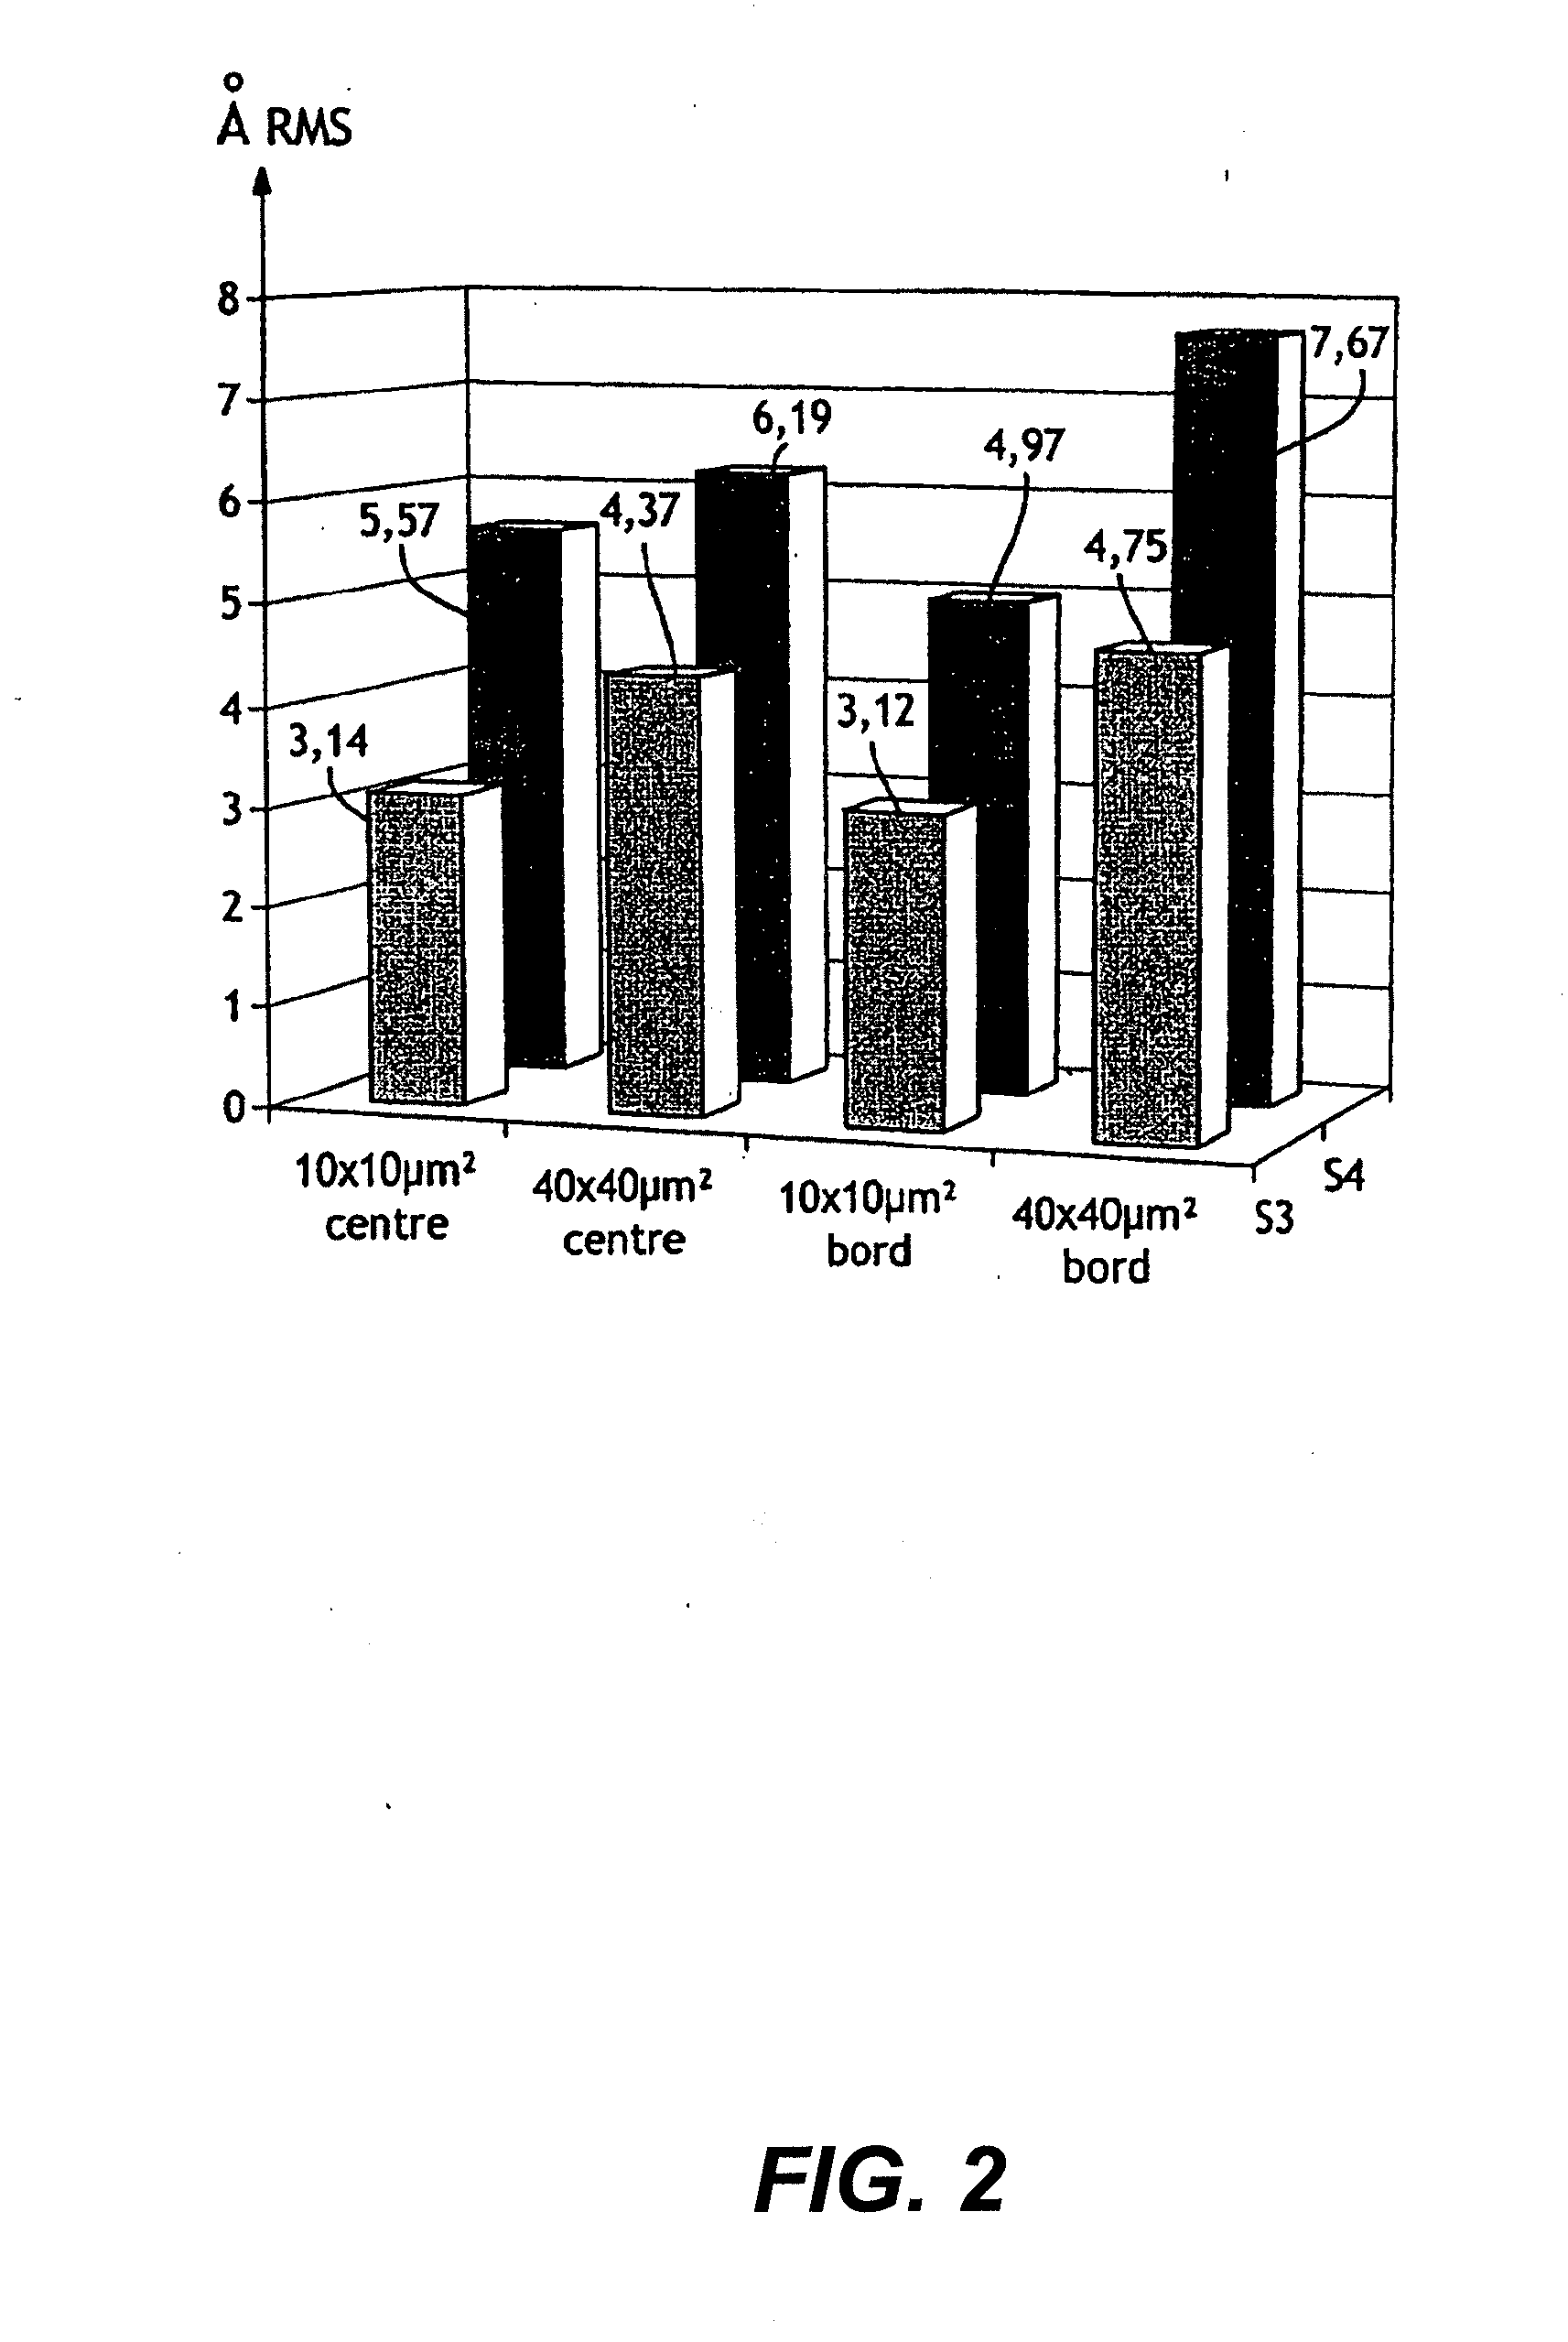 Method for reducing surface roughness while producing a high quality useful layer